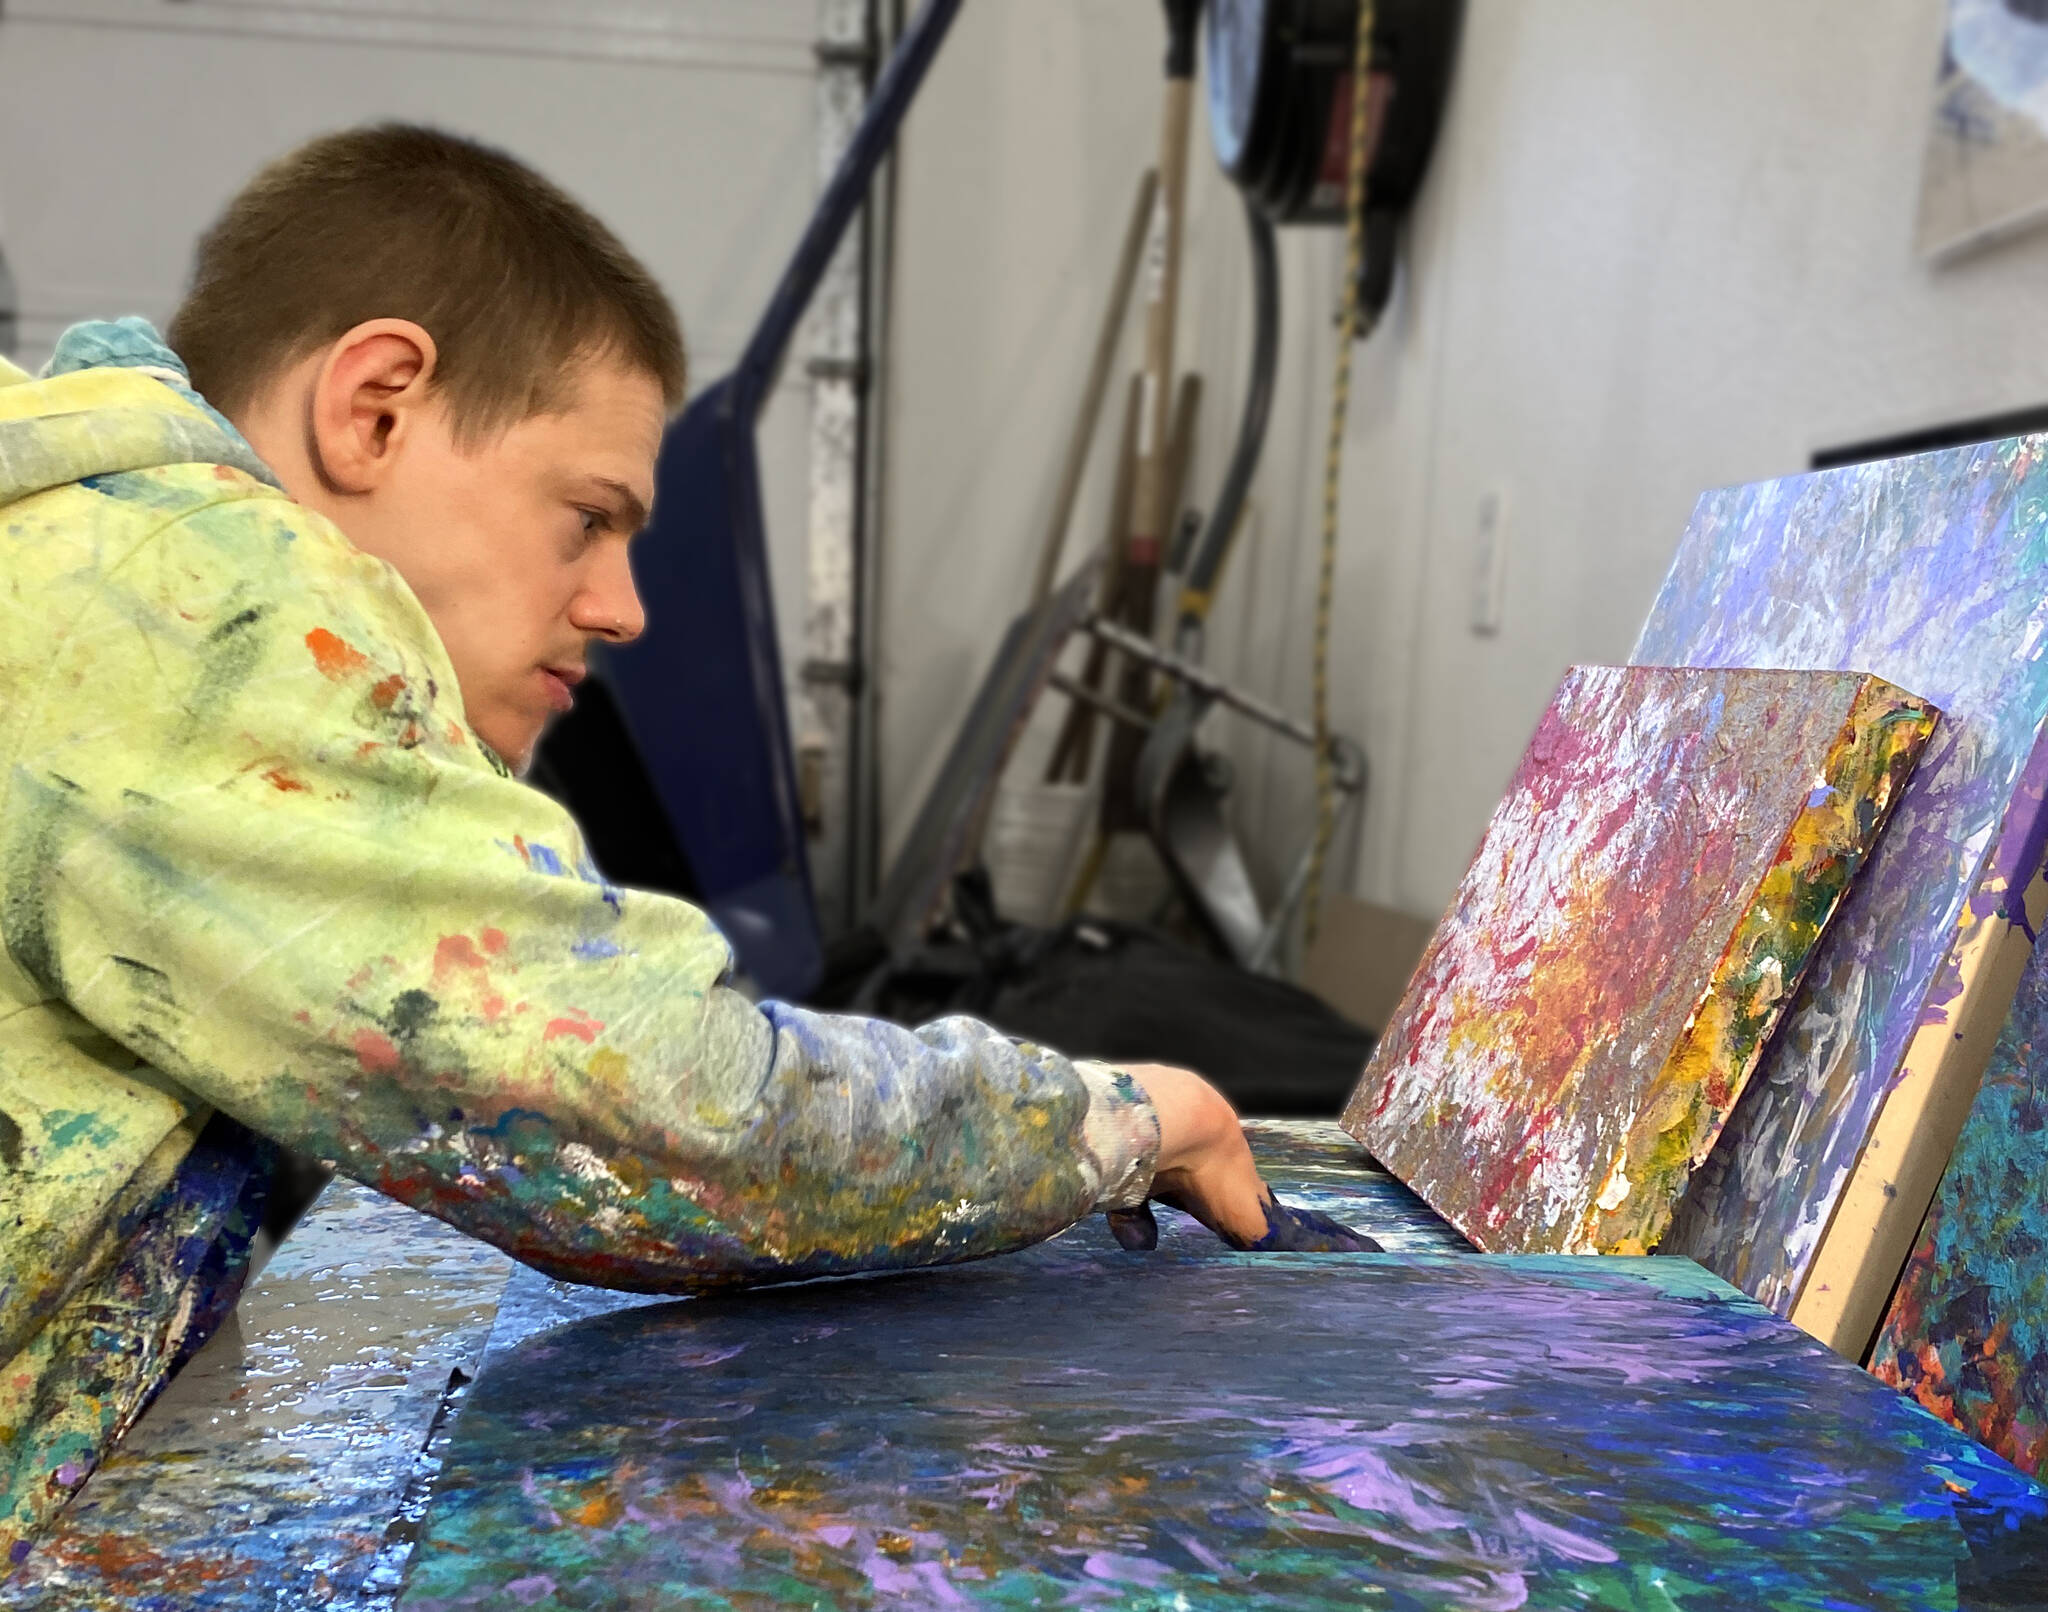 Avery Skaggs works on a painting. Skaggs’ work will be featured in an exhibit at the Juneau-Douglas City Museum that is opening on First Friday. (Courtesy Photo)